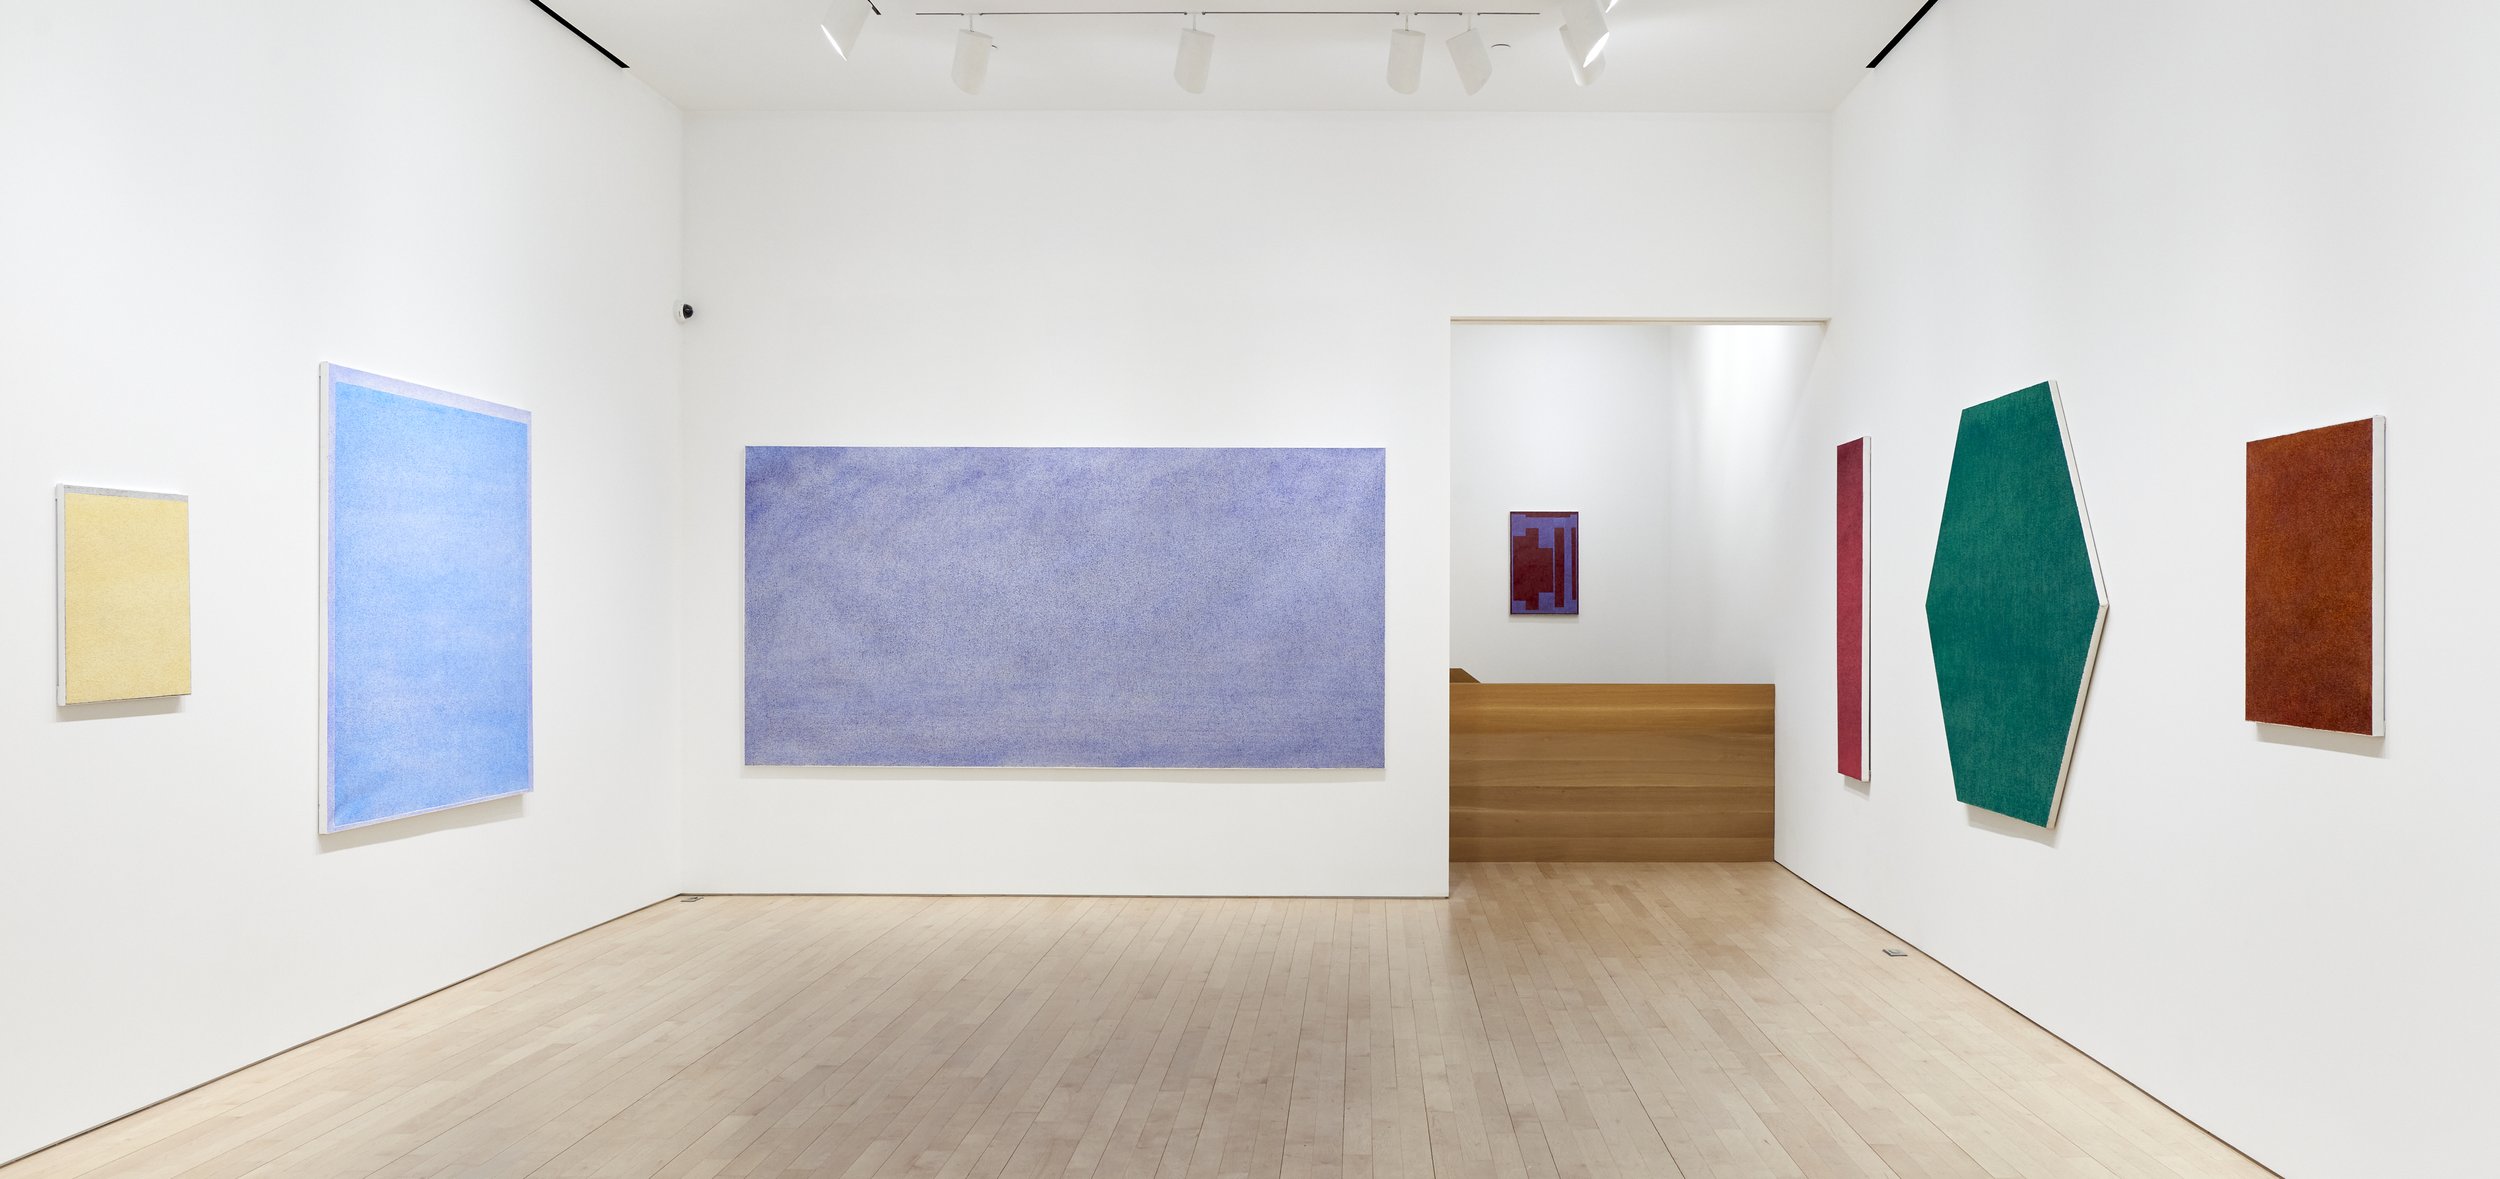 Howard Smith, "Marks in Time", 2022, Installation view at Jane Lombard Gallery. Image courtesy of Arturo Sanchez.